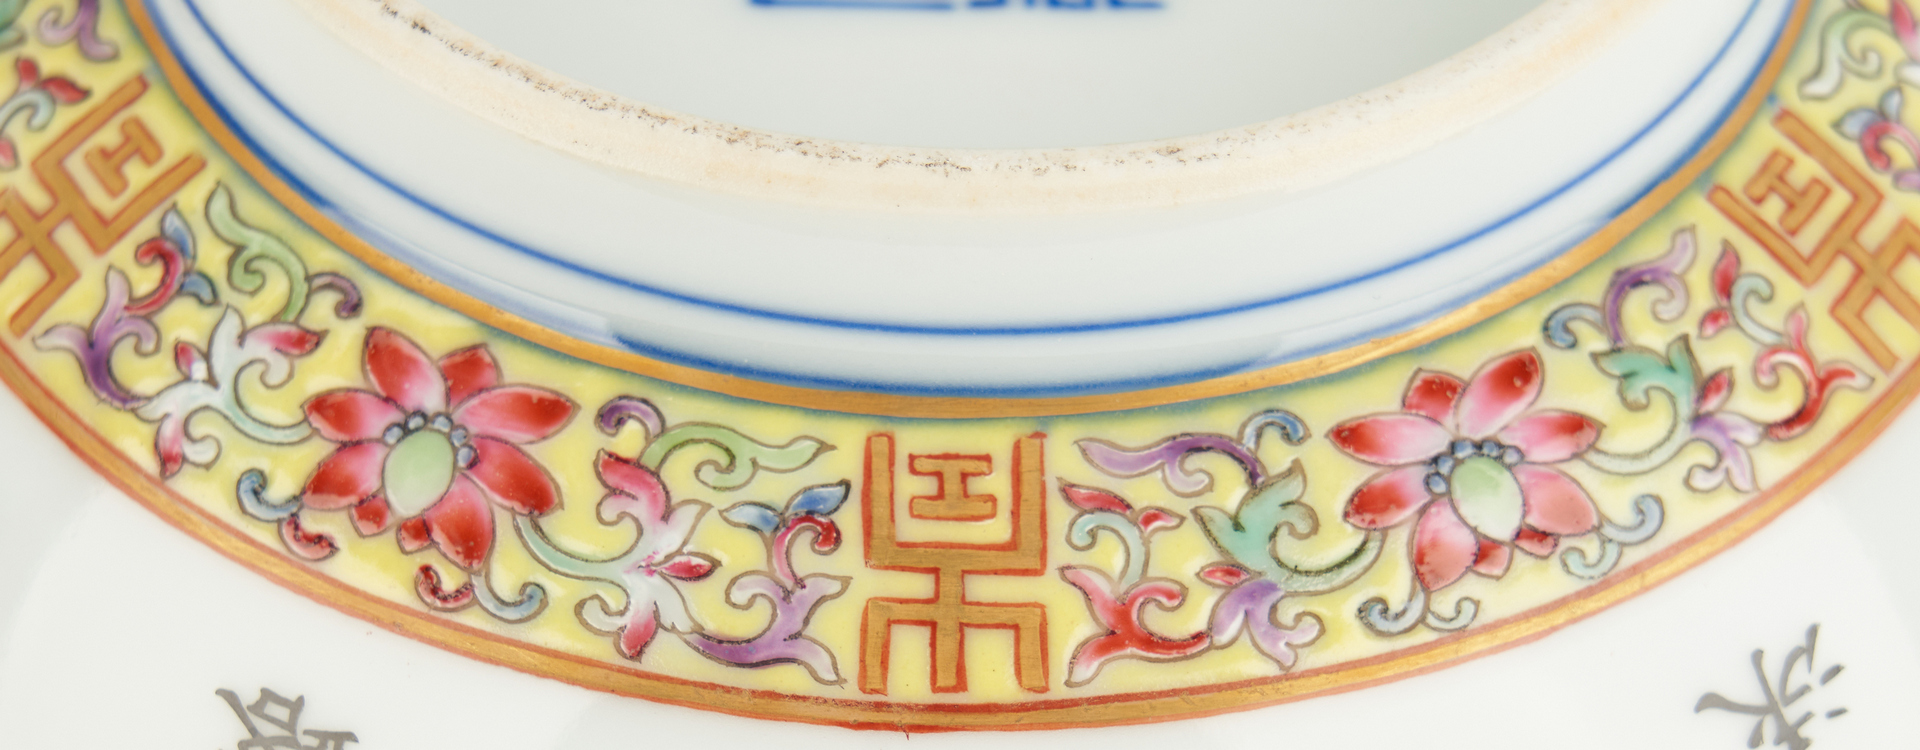 Lot 16: Pair Chinese Bowls with Calligraphy